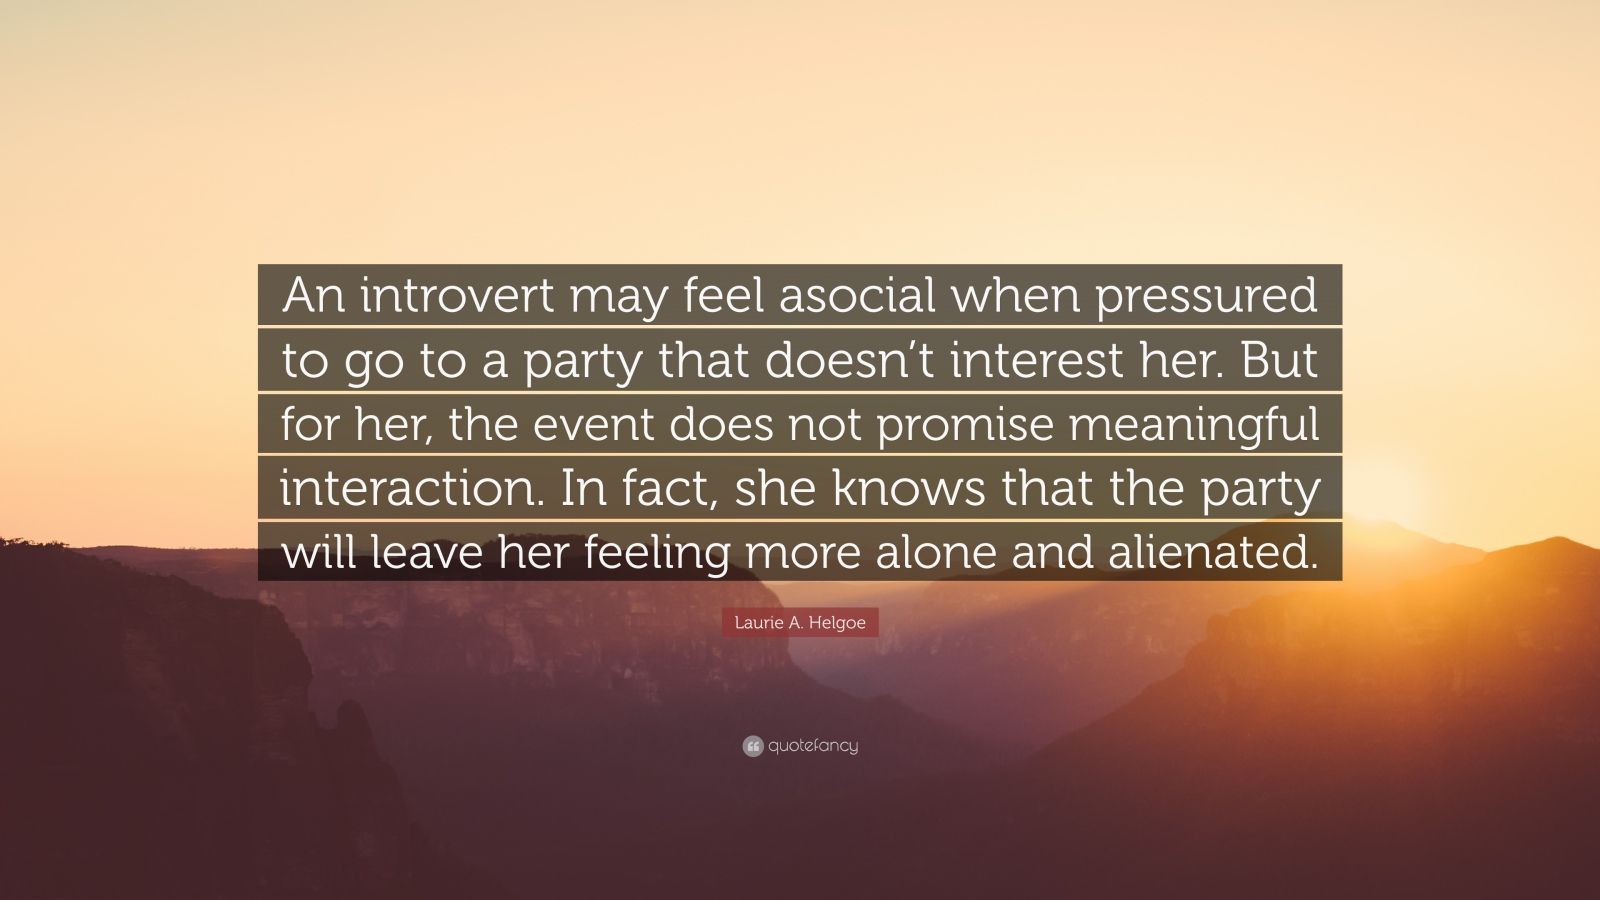 Laurie A. Helgoe Quote: “An introvert may feel asocial when pressured